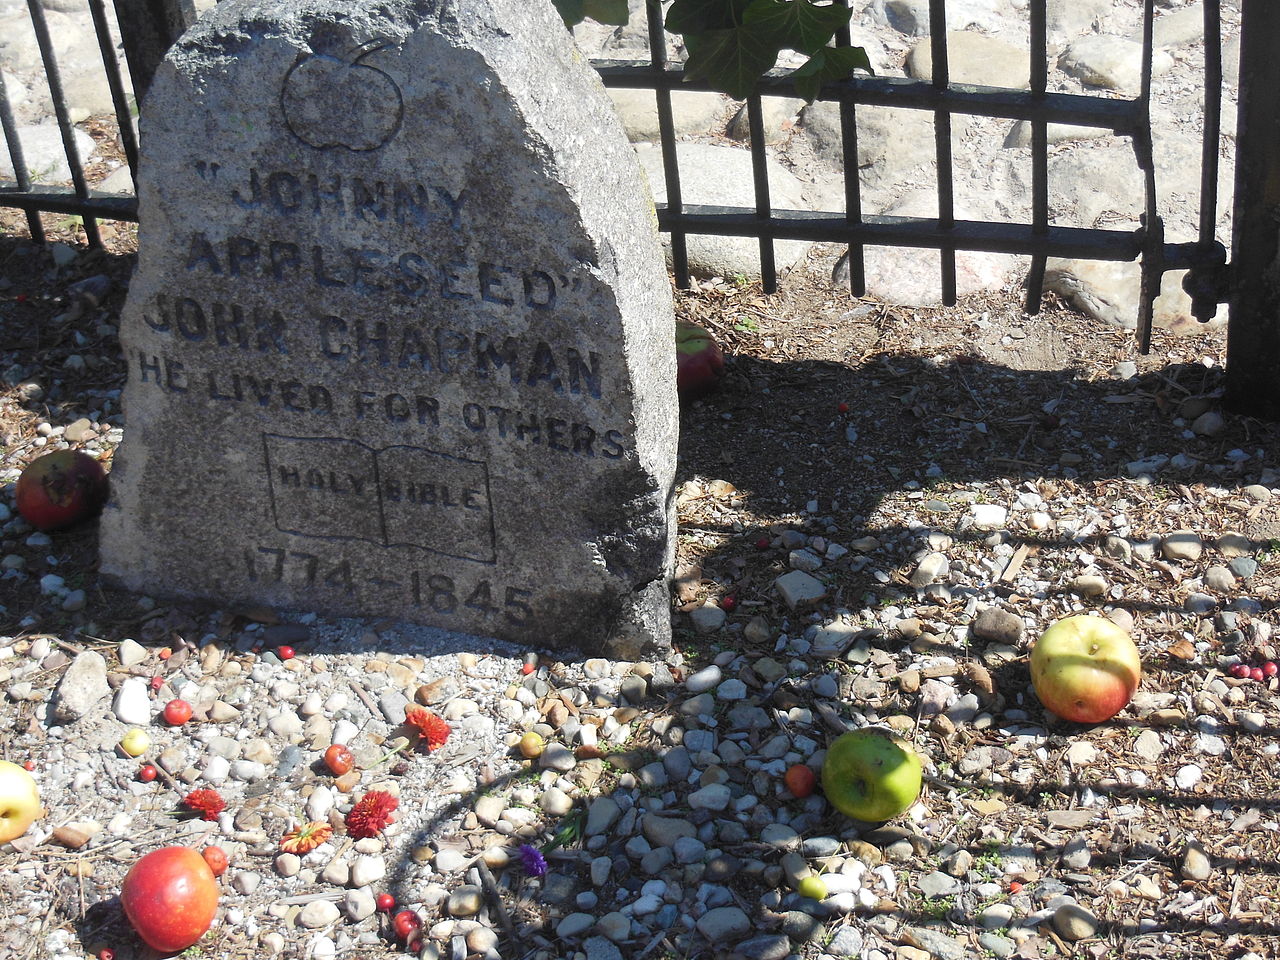 Johnny Appleseed's gravesite at the Johnny Appleseed Memorial Park